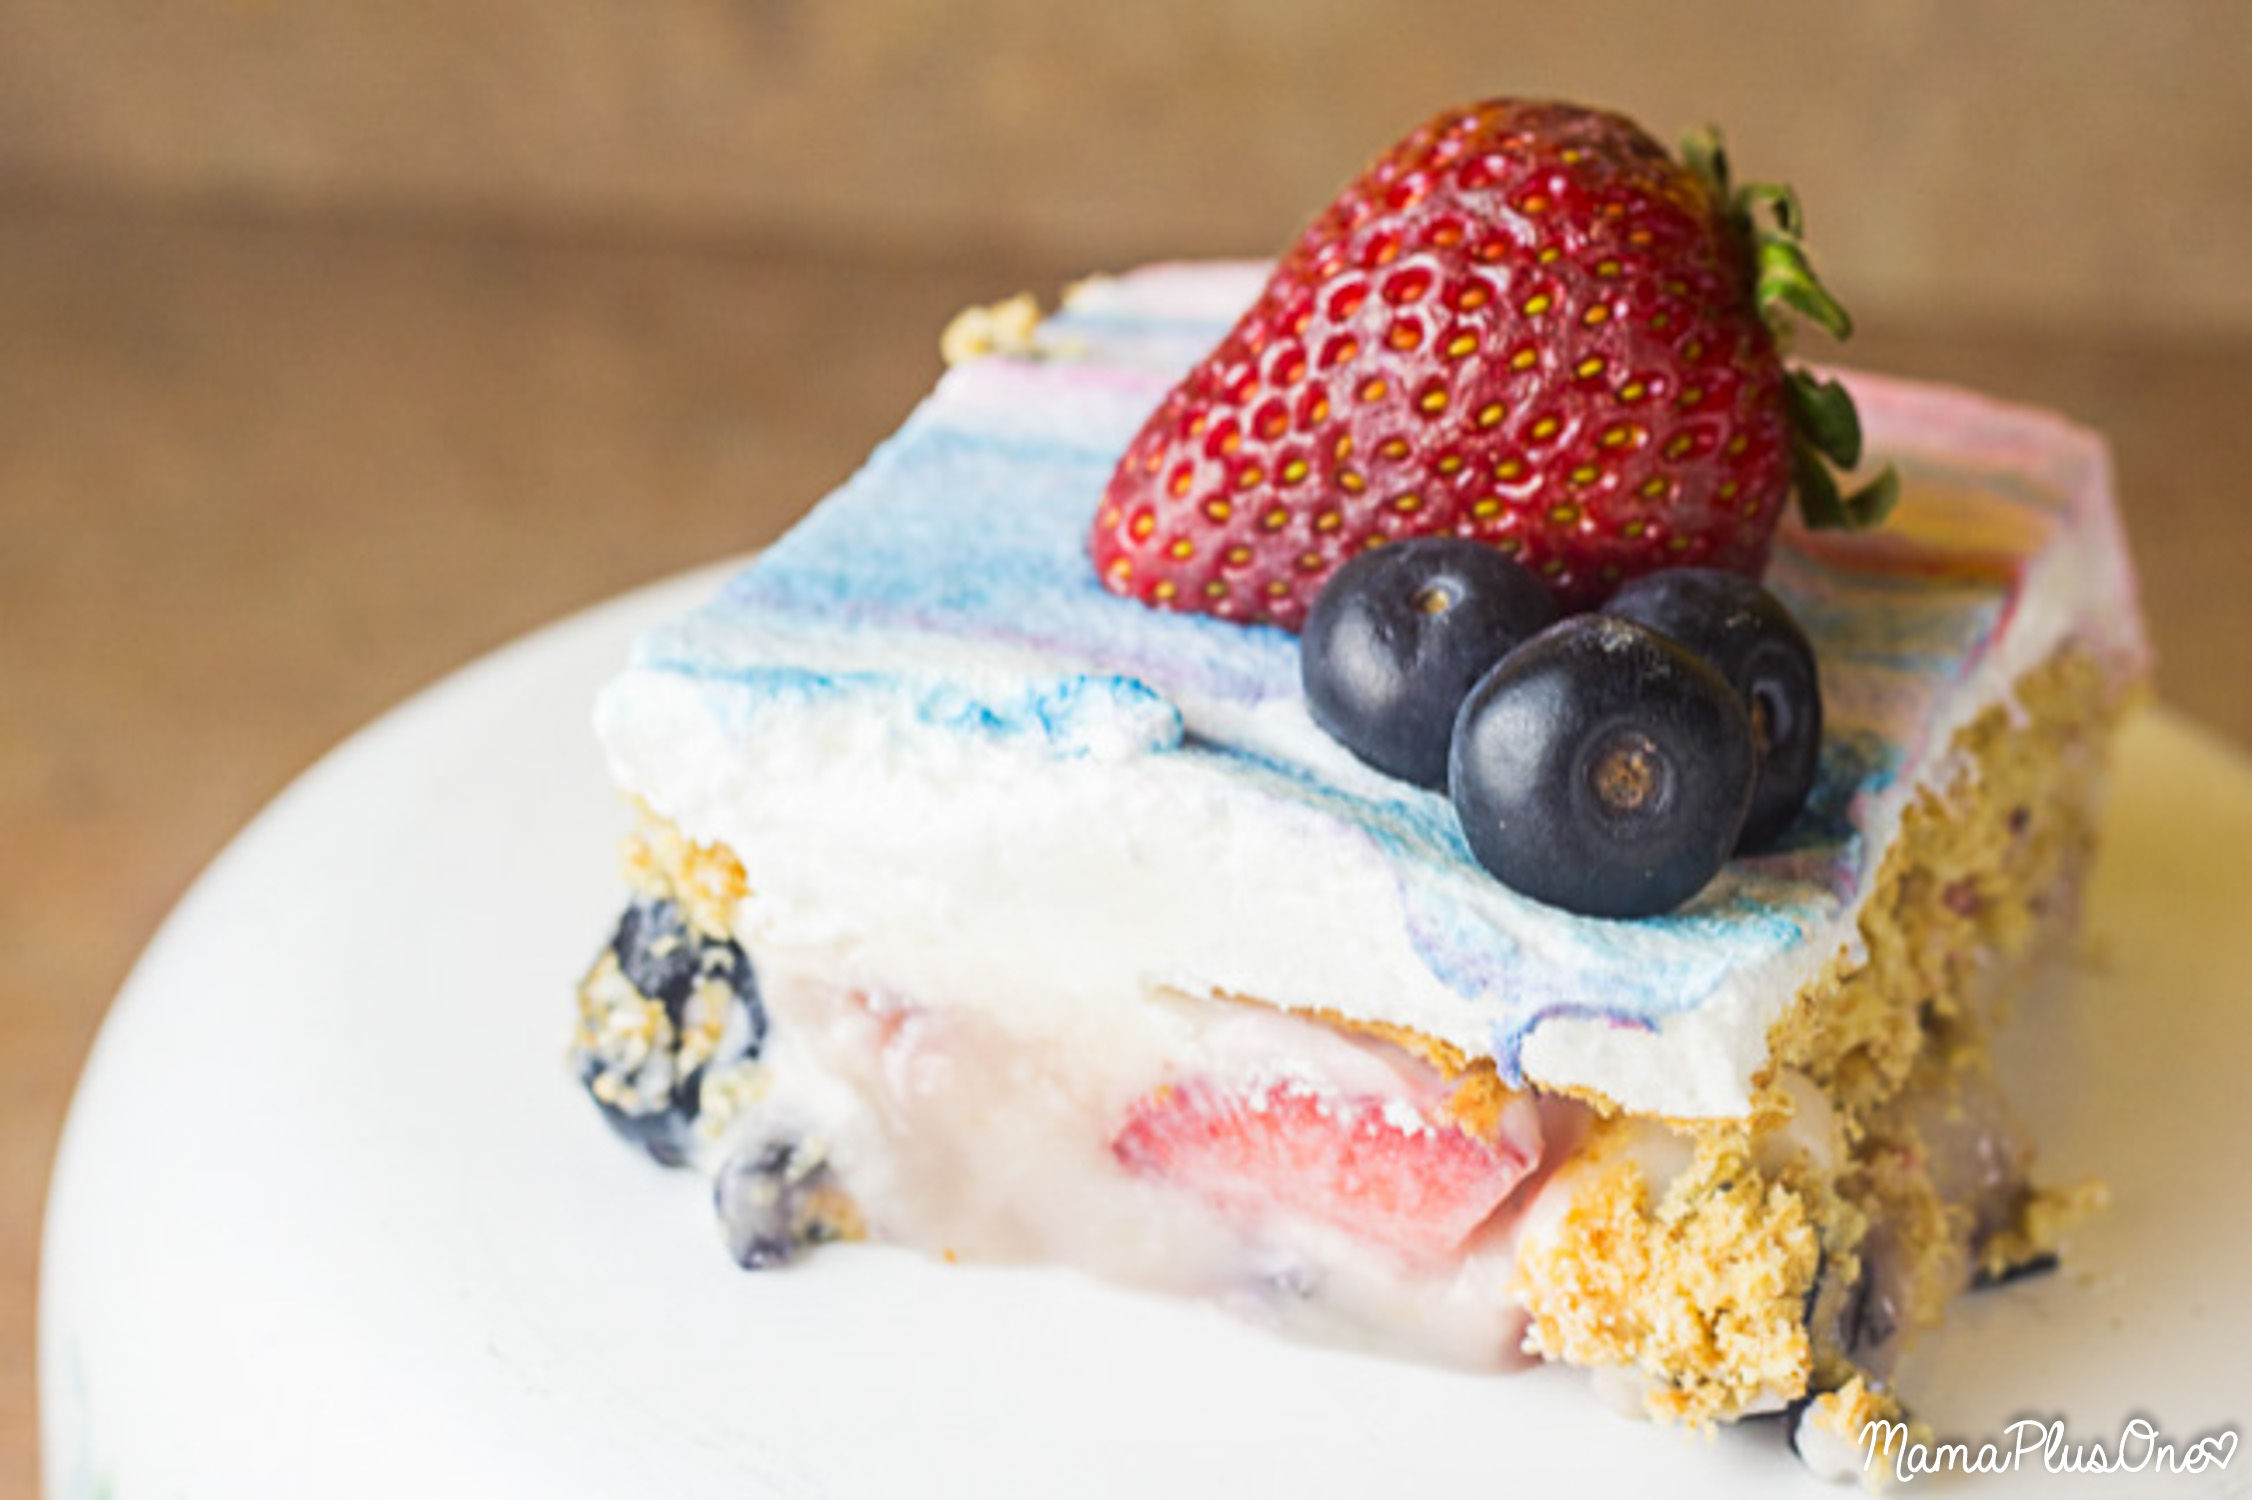 Have fresh berries? Make this delicious berry icebox cake! Creamy and packed with berry flavor, it's the perfect treat for backyard barbecues and makes a great 4th of July dessert. Plus, it's a no-bake dessert so you don't have to worry about even heating up the kitchen to make it!